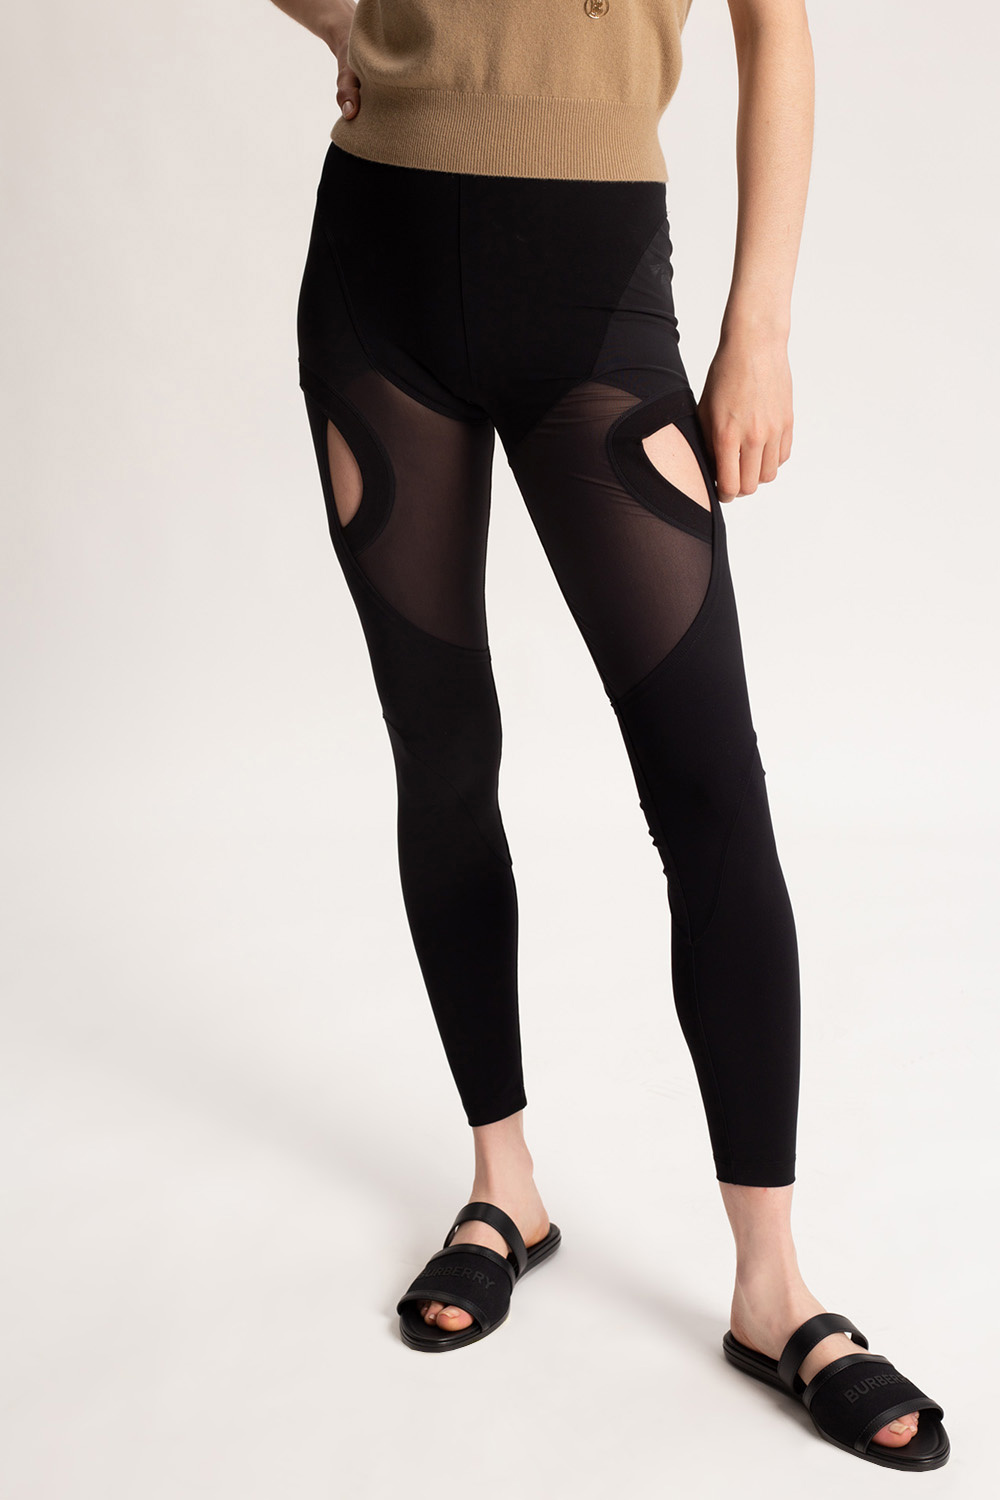 Buy Sexy Burberry Leggings - Women - 26 products | FASHIOLA.in